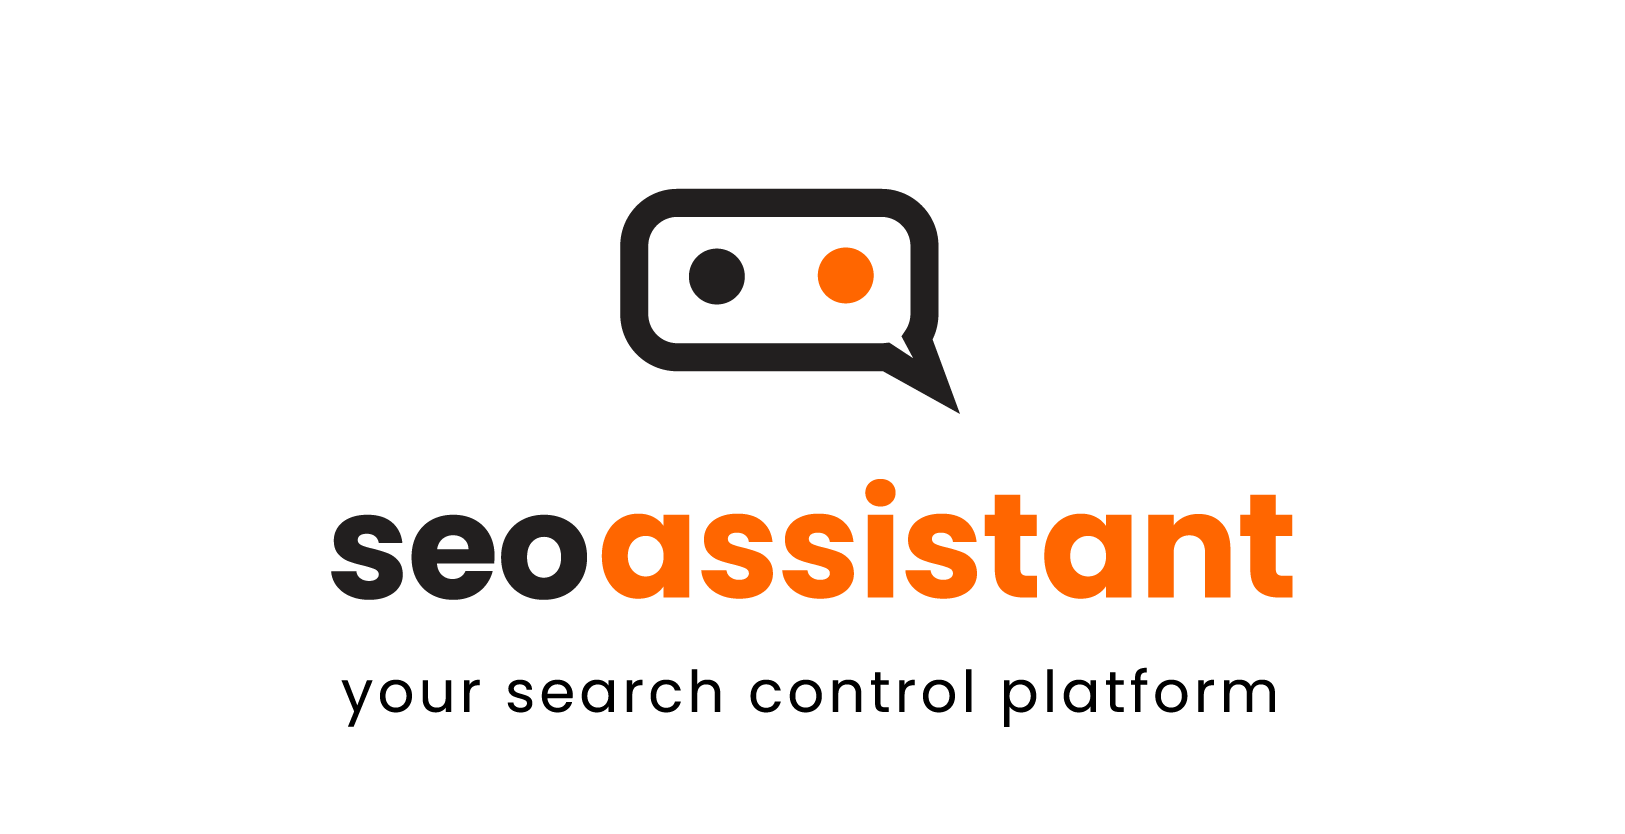 Seo Manager icon